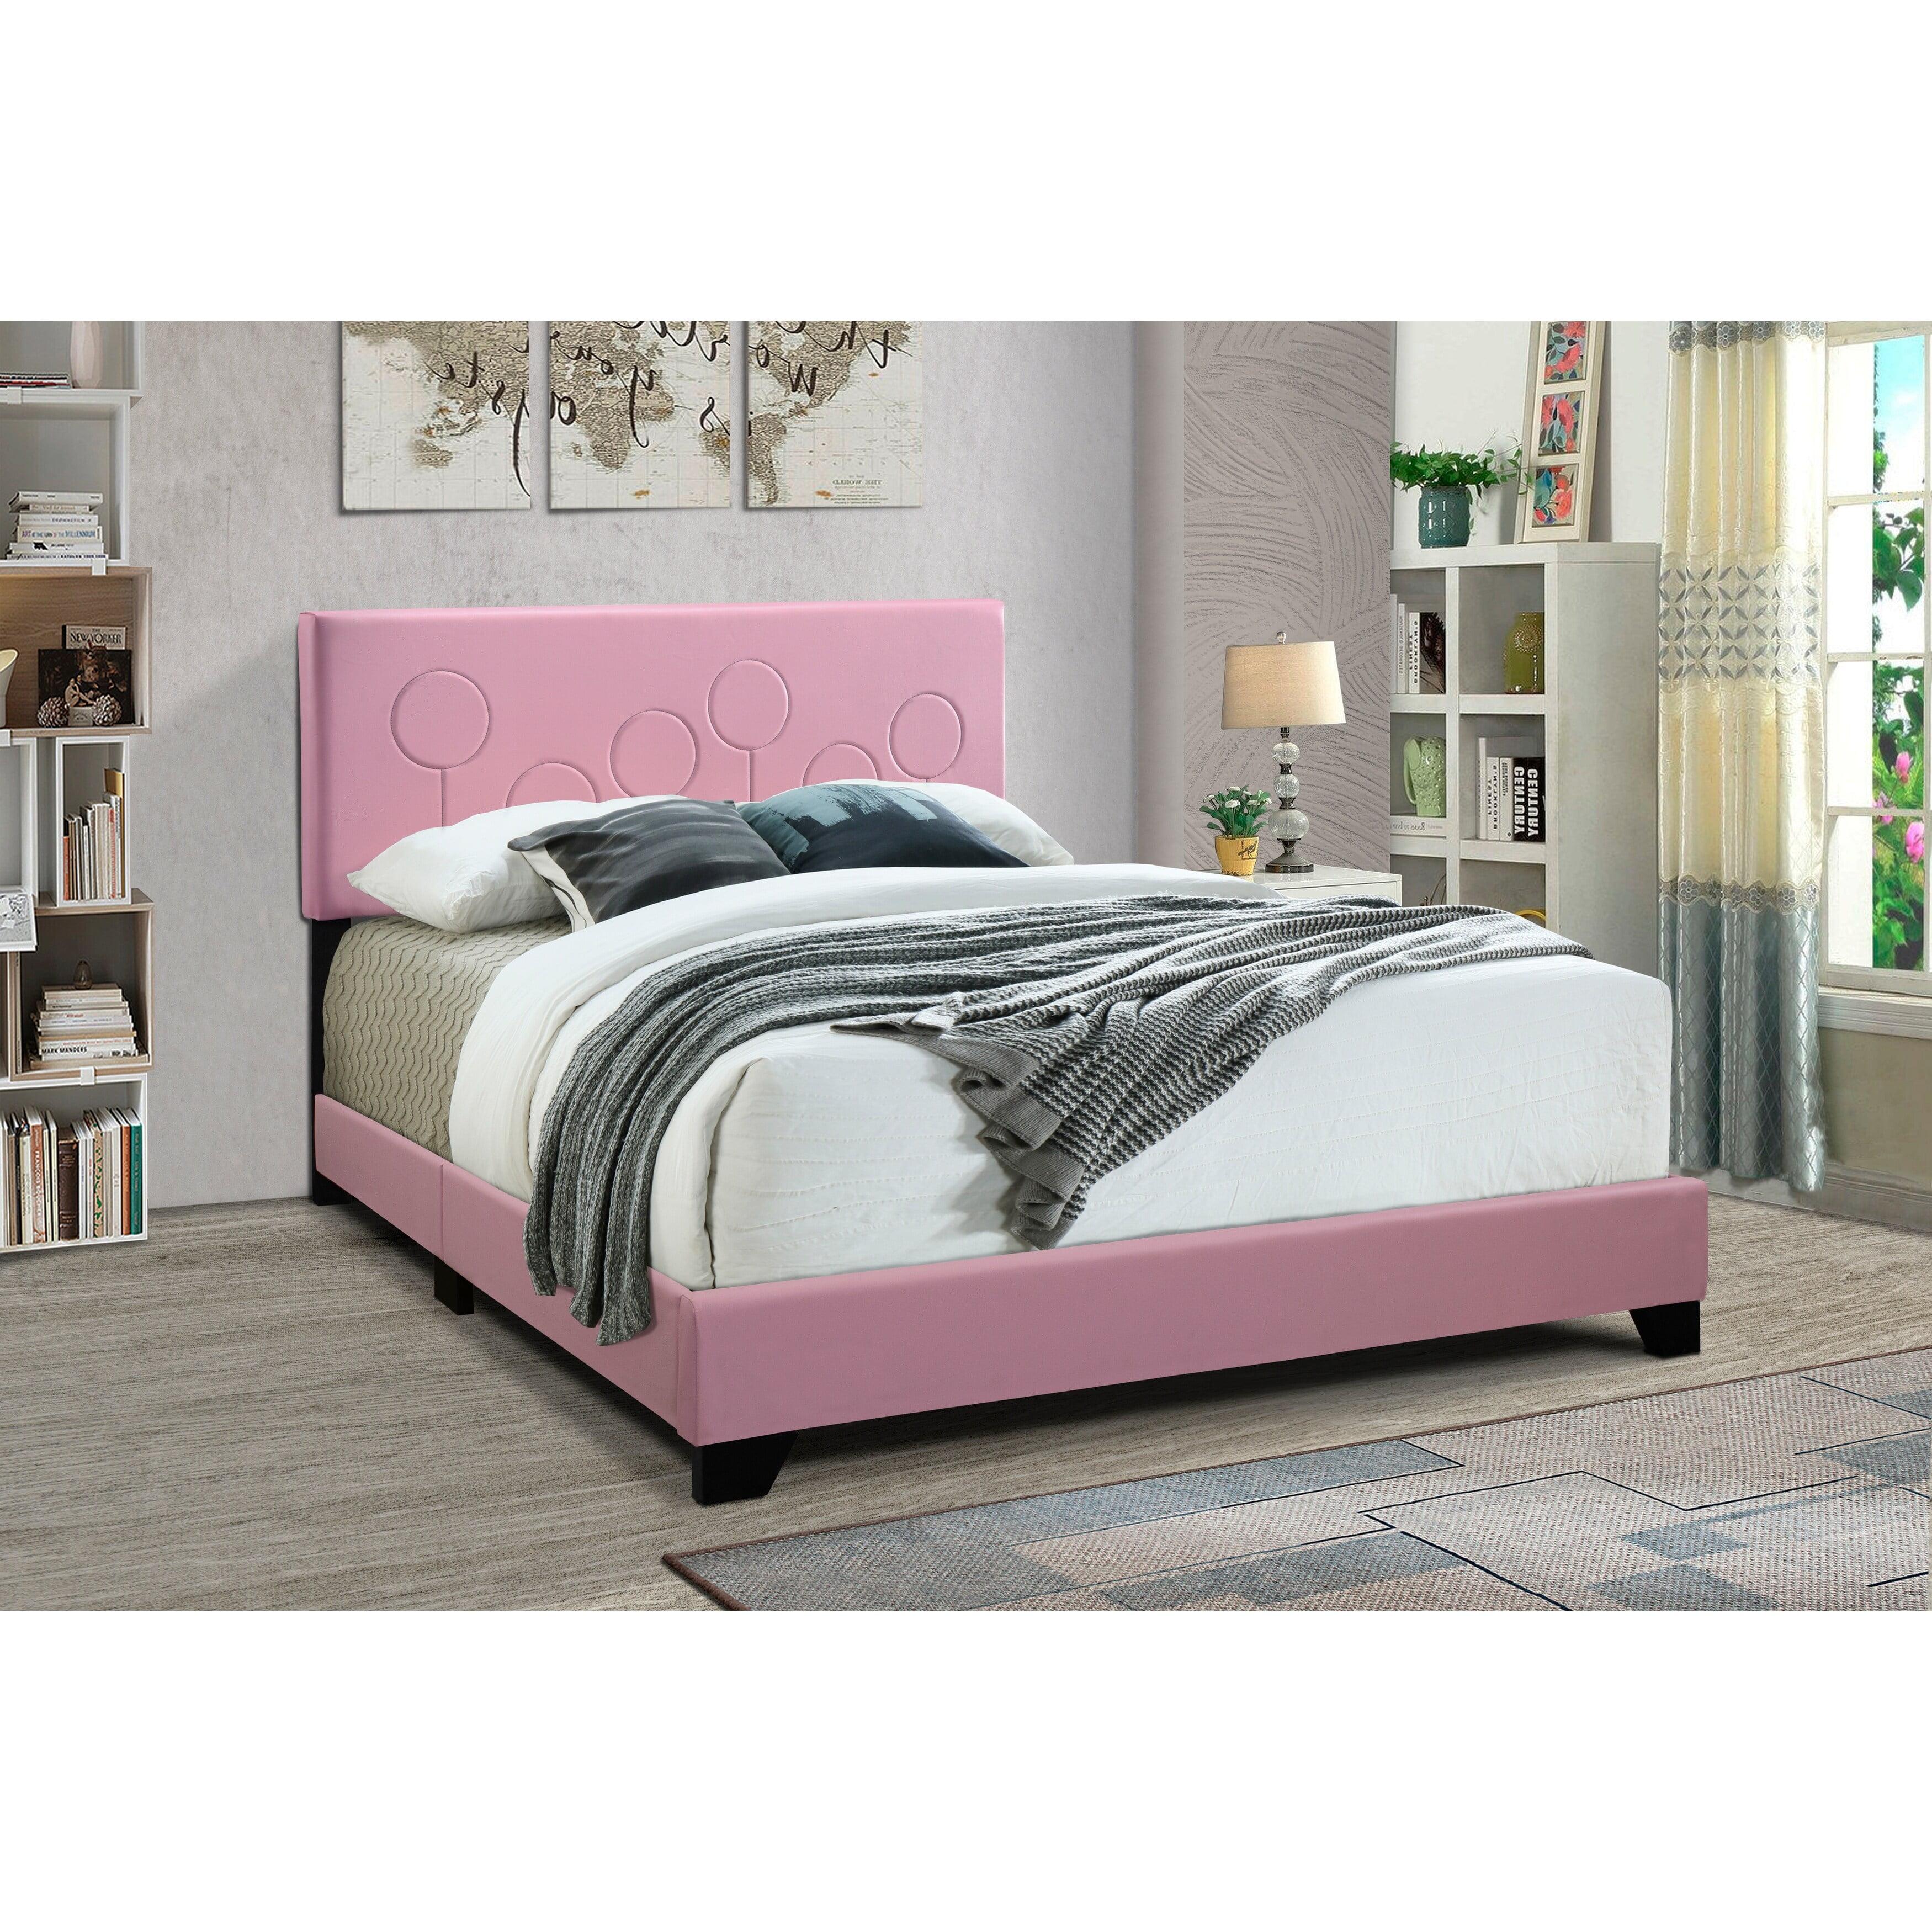 Queen Bubblegum Pink Faux Leather Upholstered Bed with Headboard